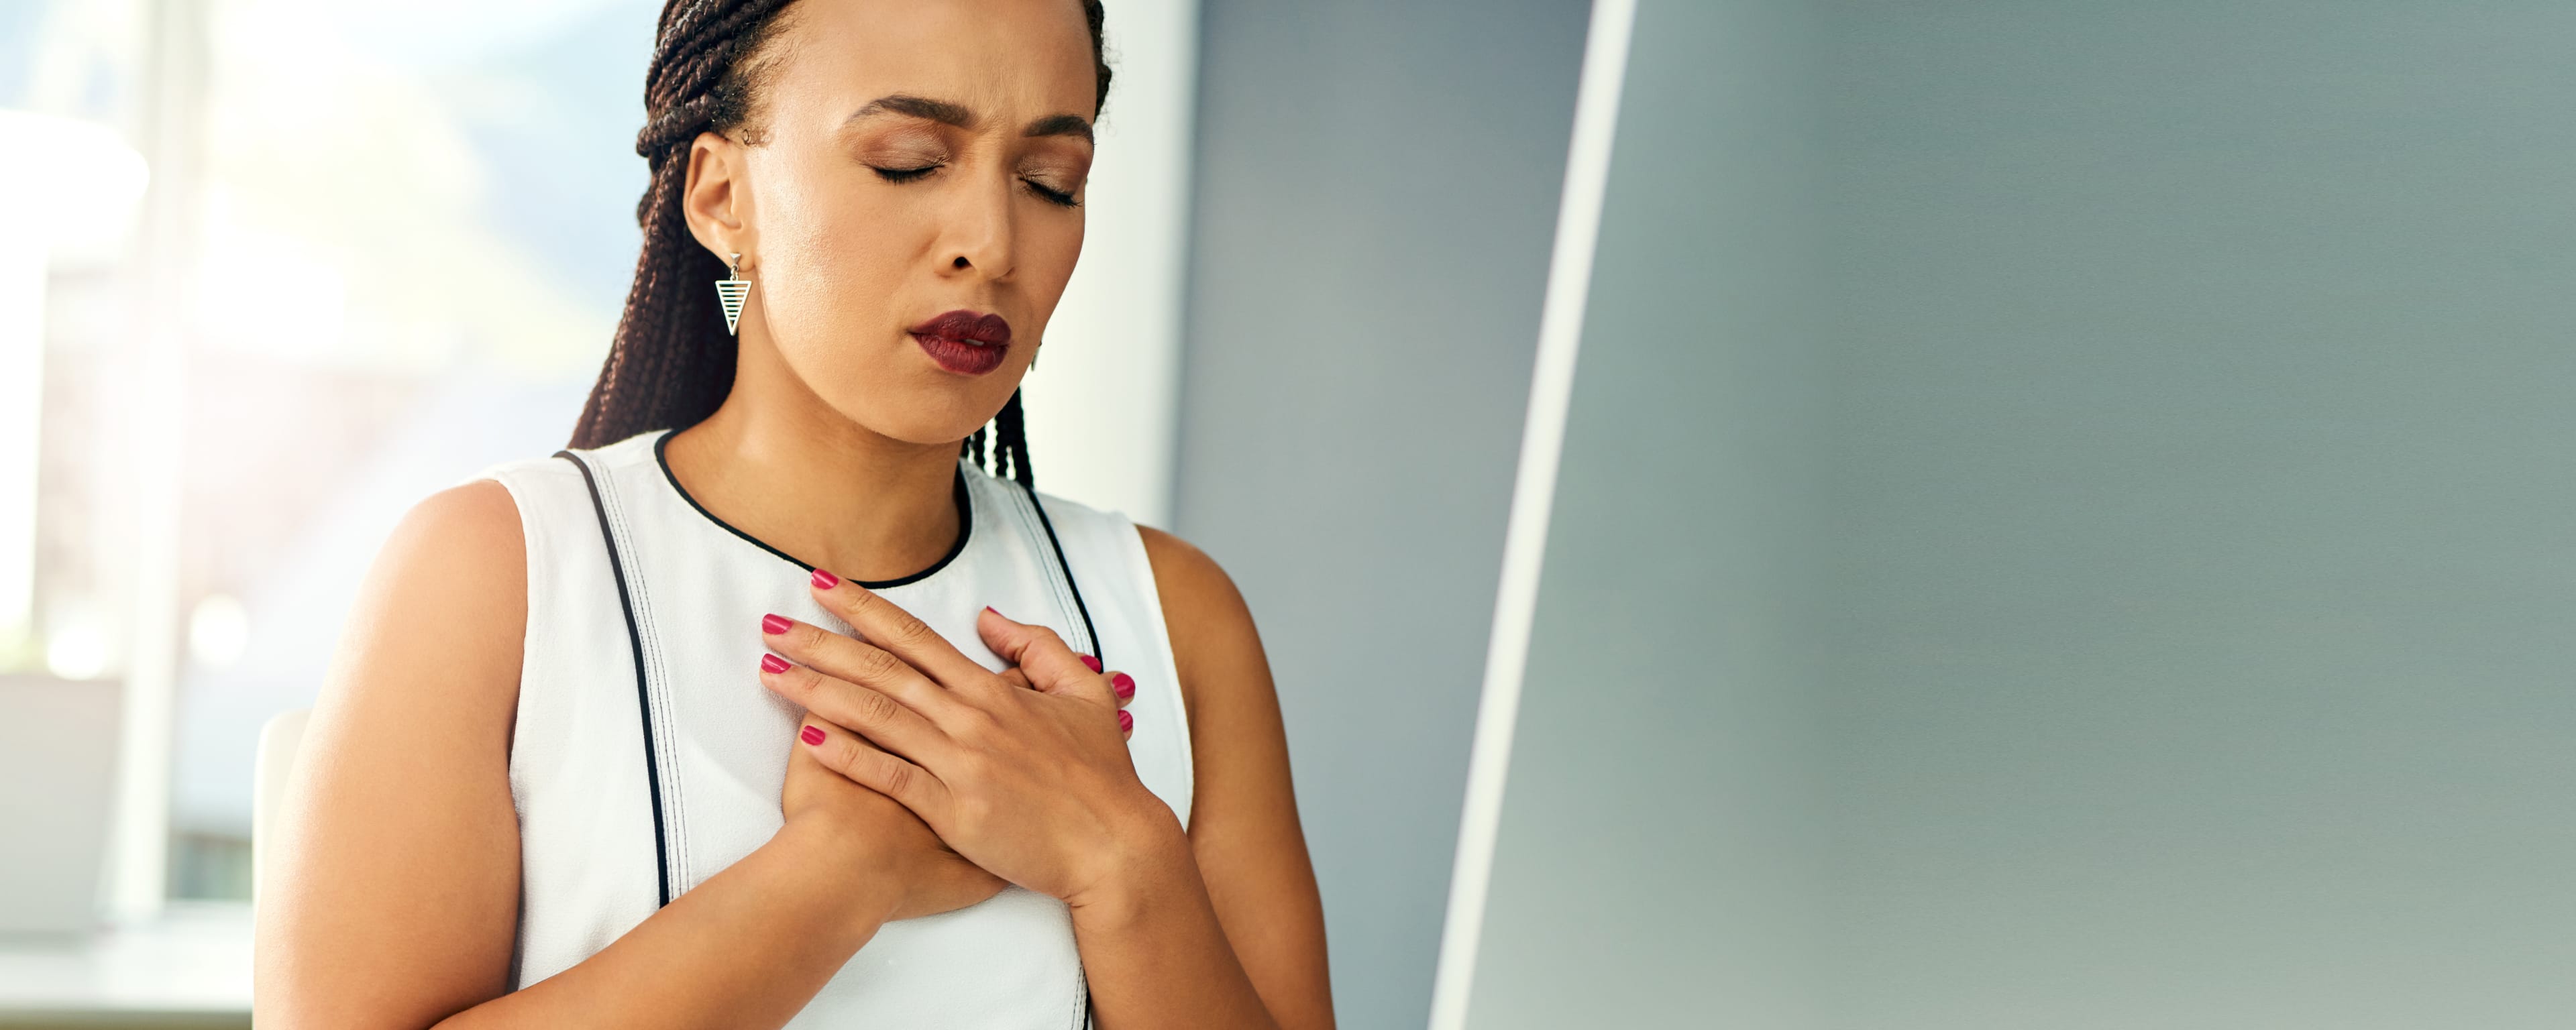 woman with hands on chest experiencing heartburn